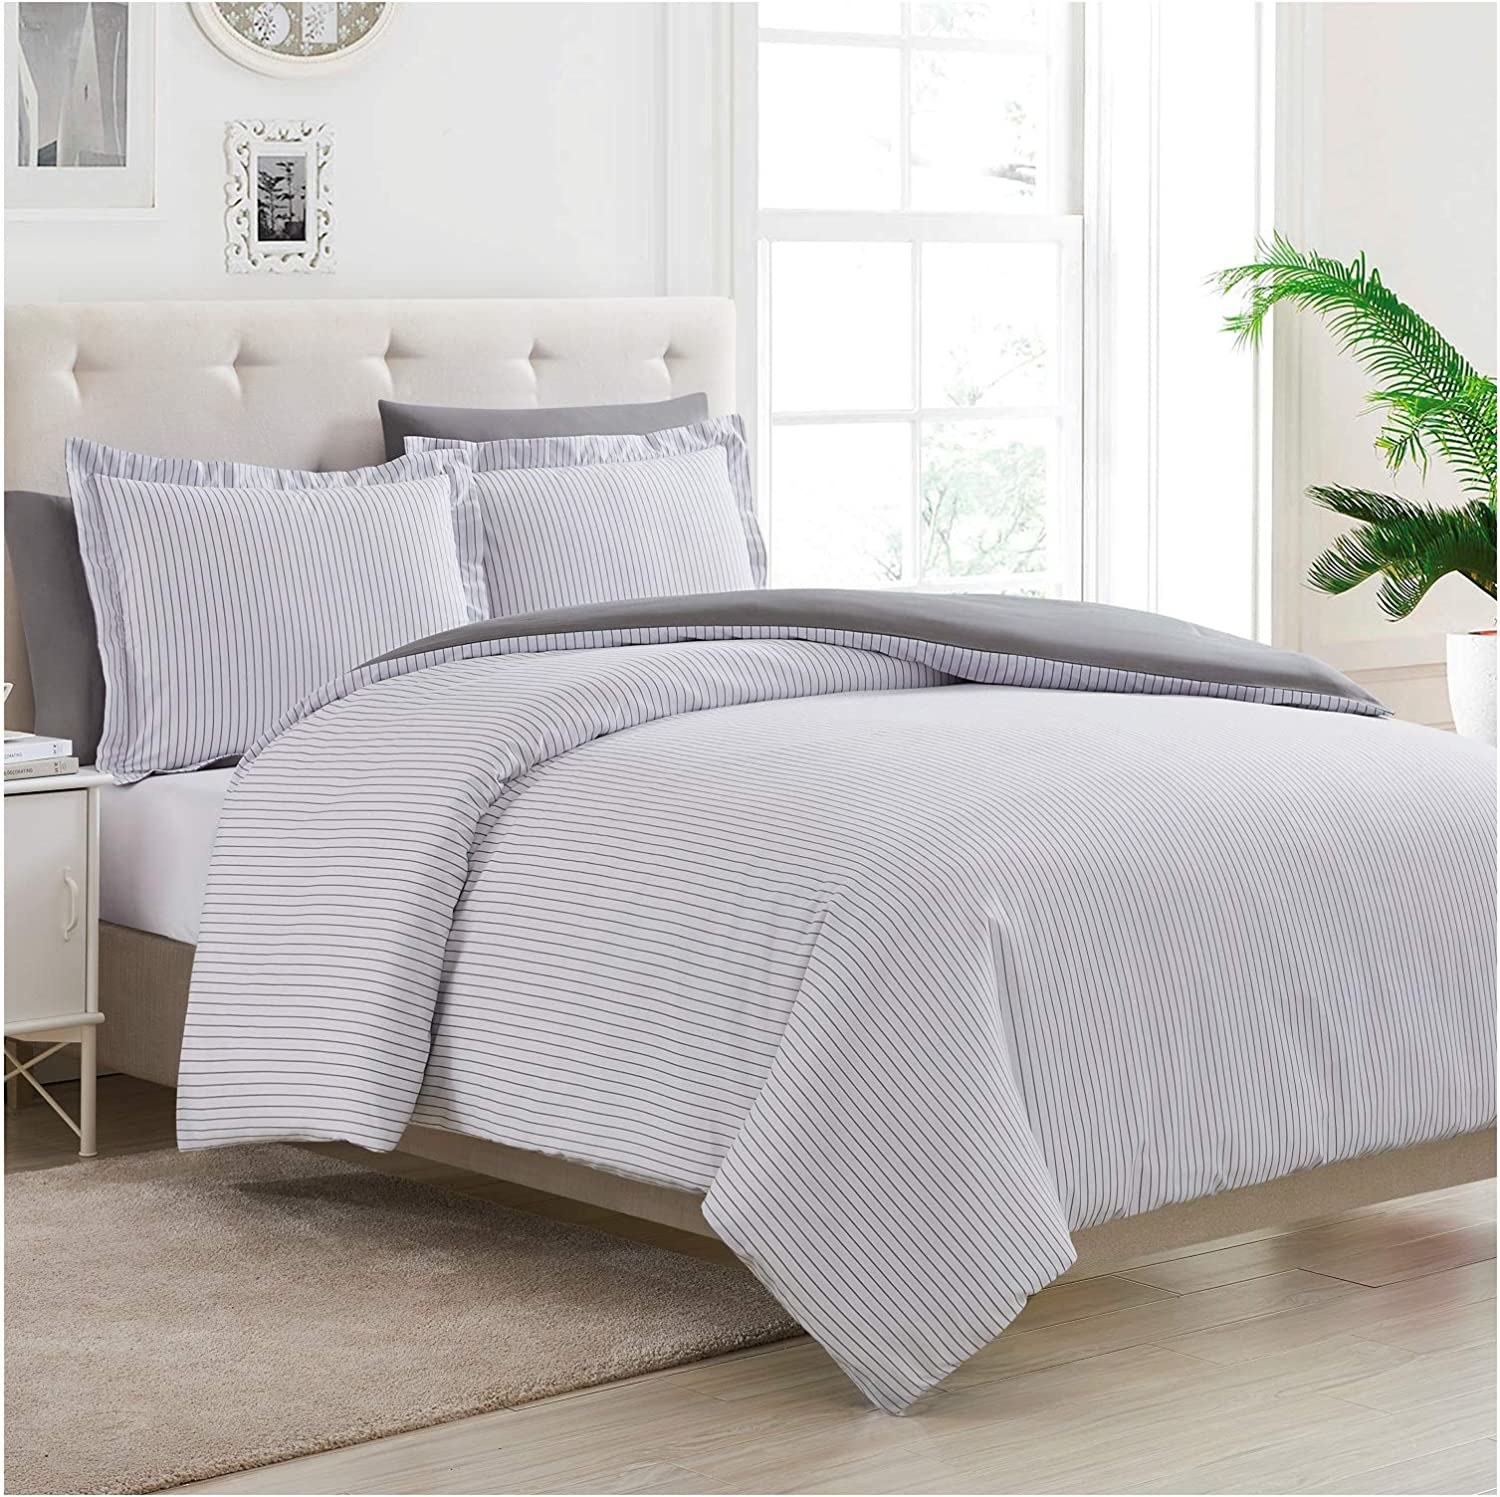 the pin striped duvet cover